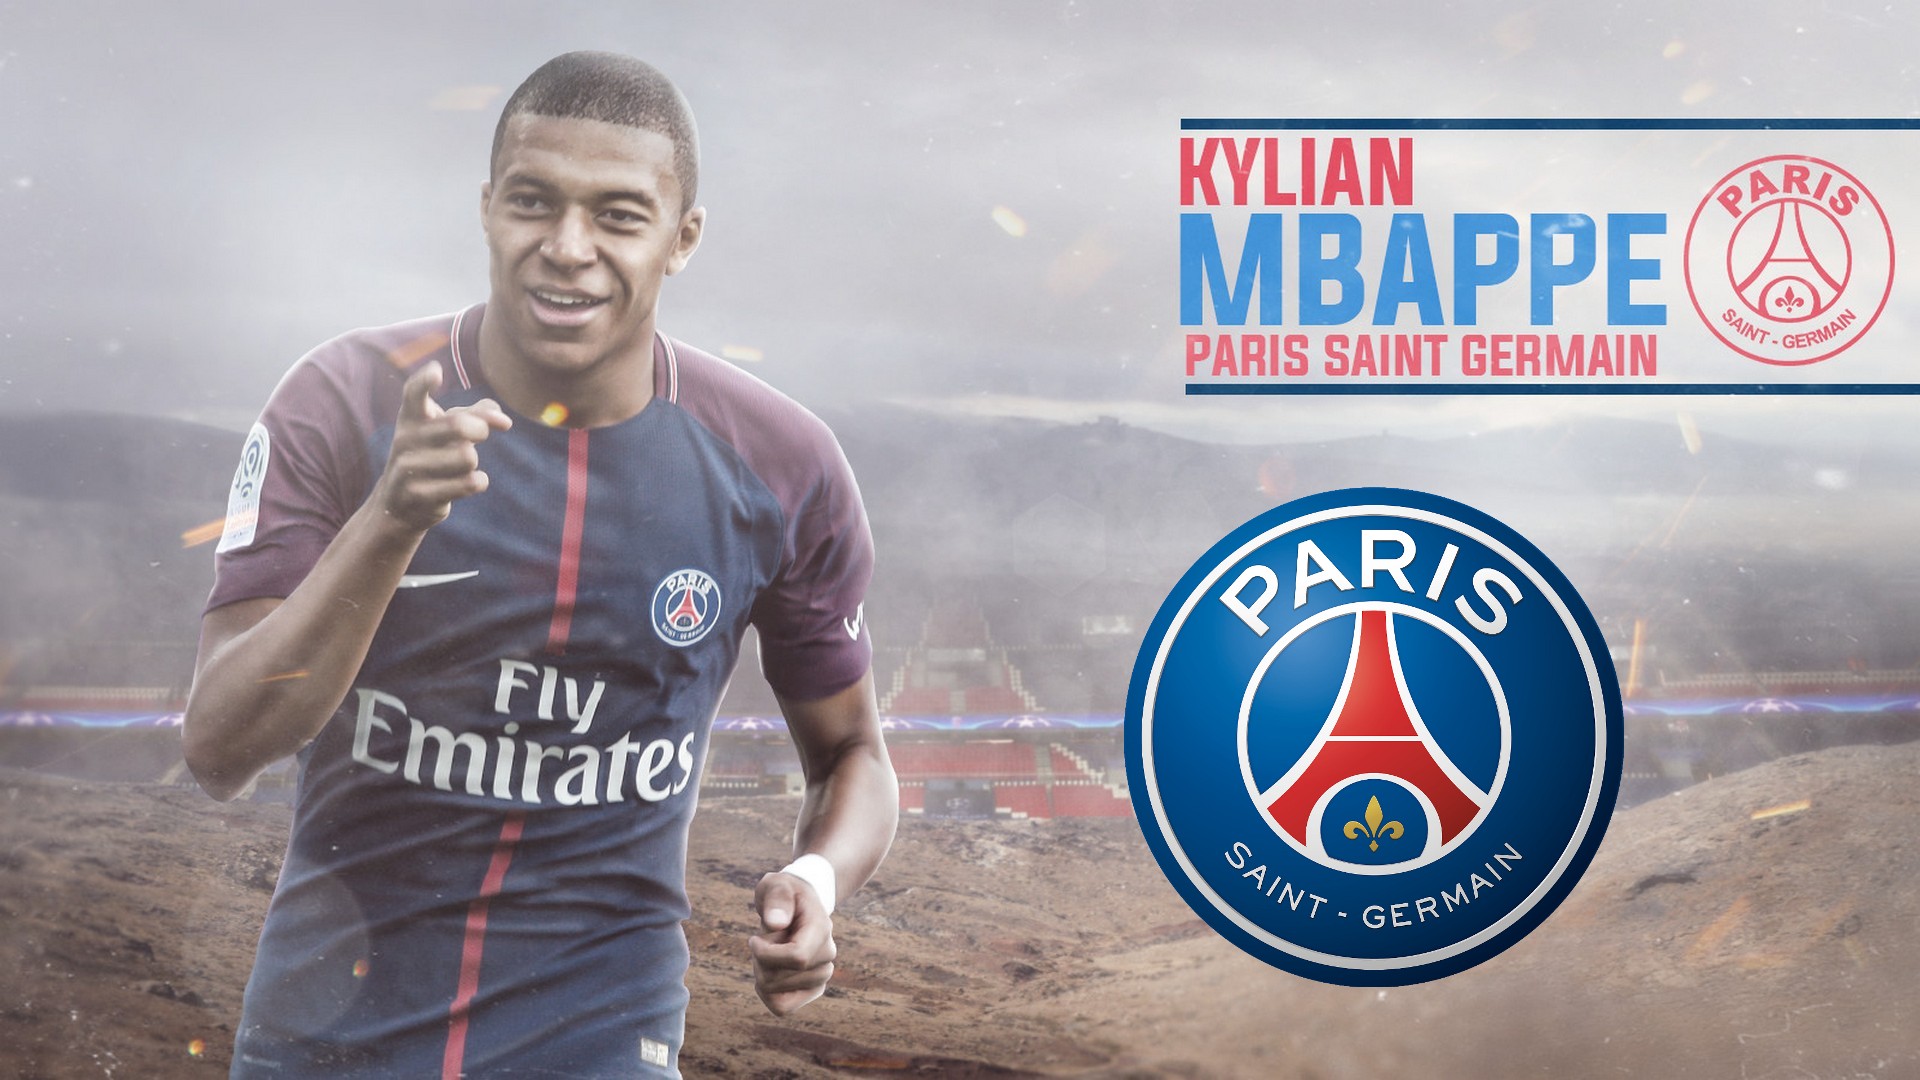 HD Kylian Mbappe PSG Backgrounds With Resolution 1920X1080 pixel. You can make this wallpaper for your Mac or Windows Desktop Background, iPhone, Android or Tablet and another Smartphone device for free